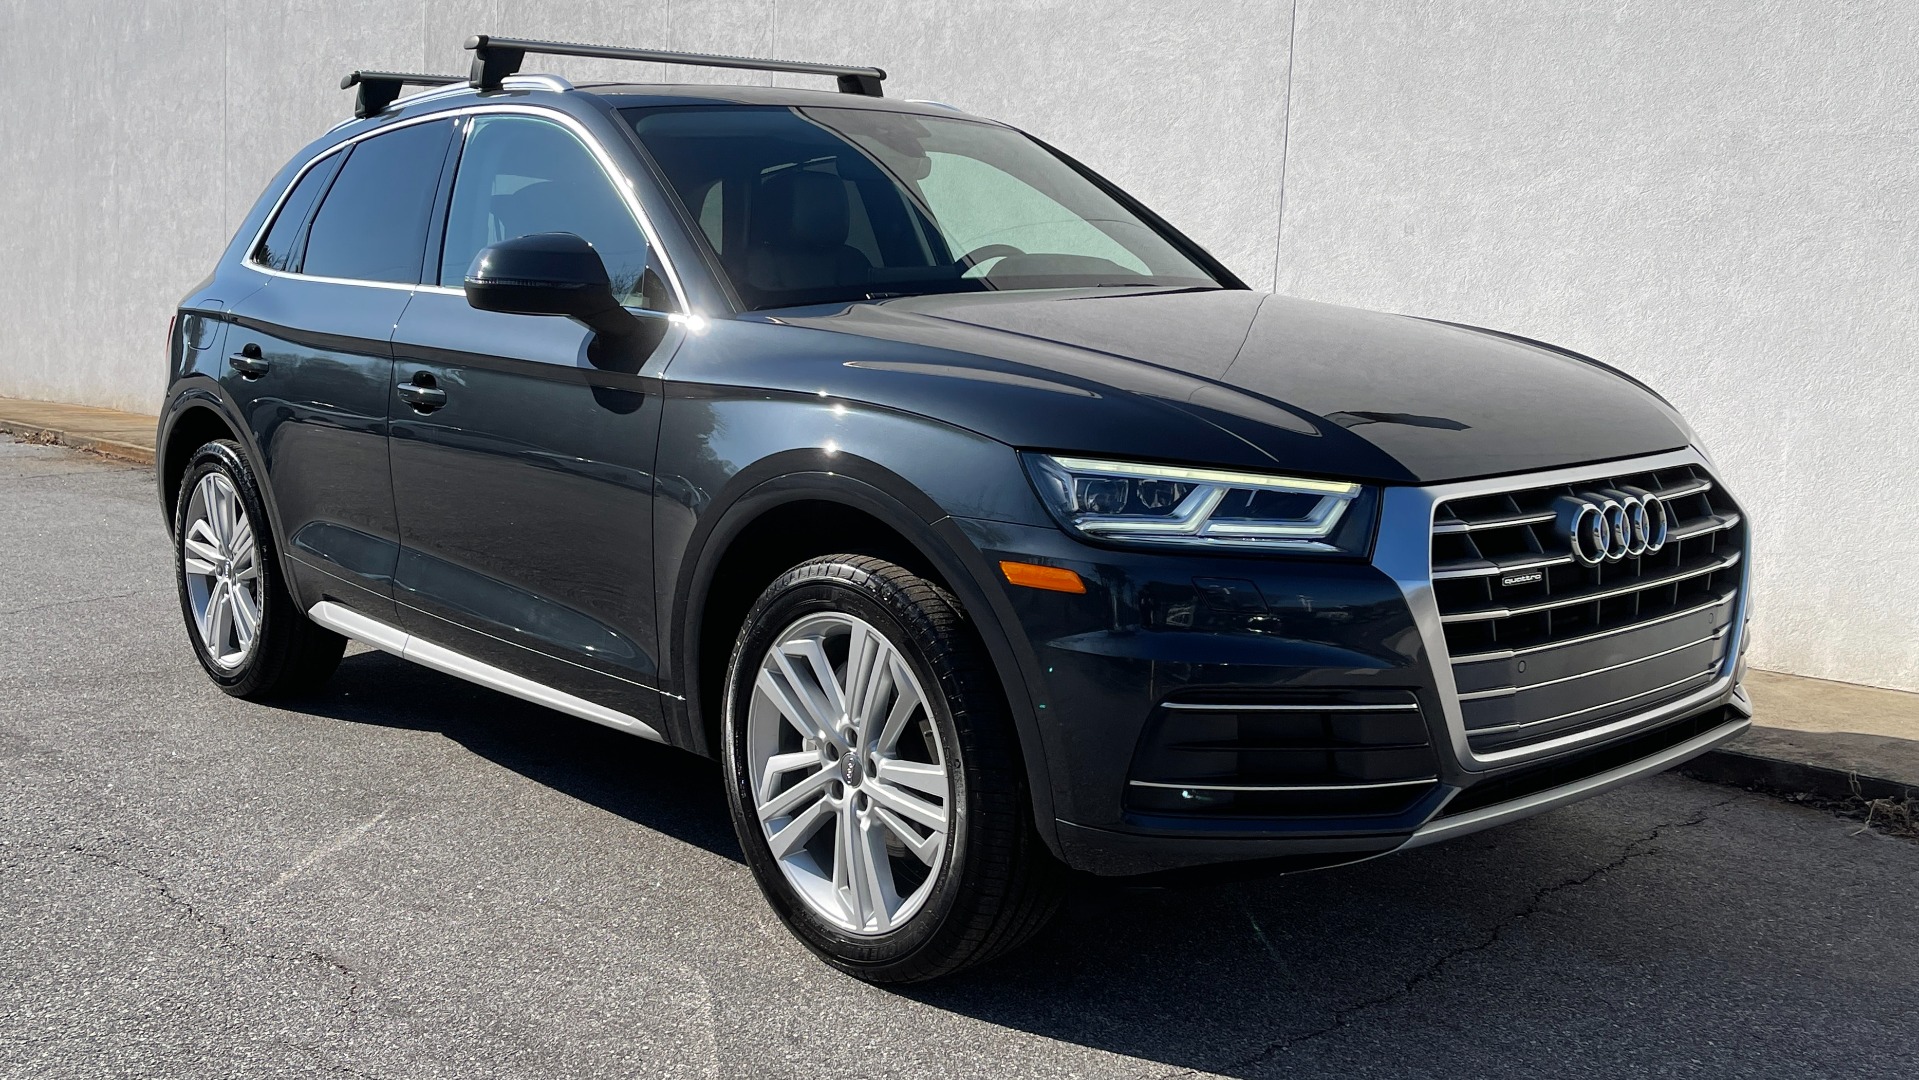 Used 2019 Audi Q5 PREMIUM PLUS / NAV / SUNROOF / WARM WTHR / PARK SYS PLUS / REARVIEW for sale $40,495 at Formula Imports in Charlotte NC 28227 5